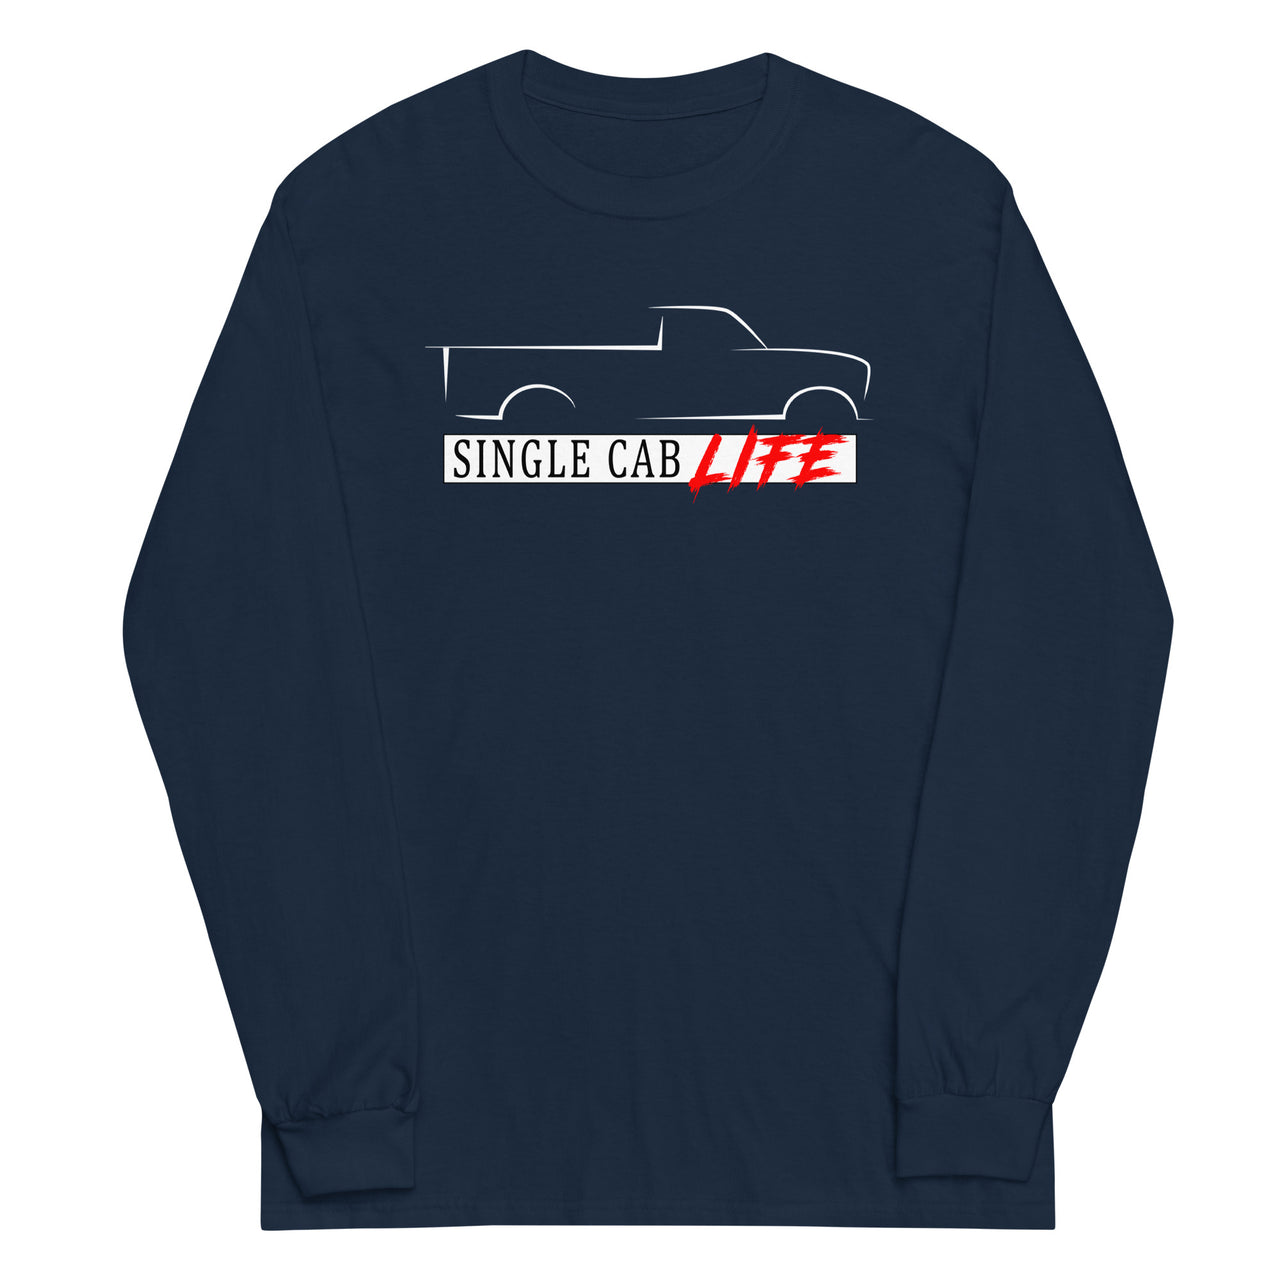 Single Cab Life Long Sleeve T-Shirt in navy